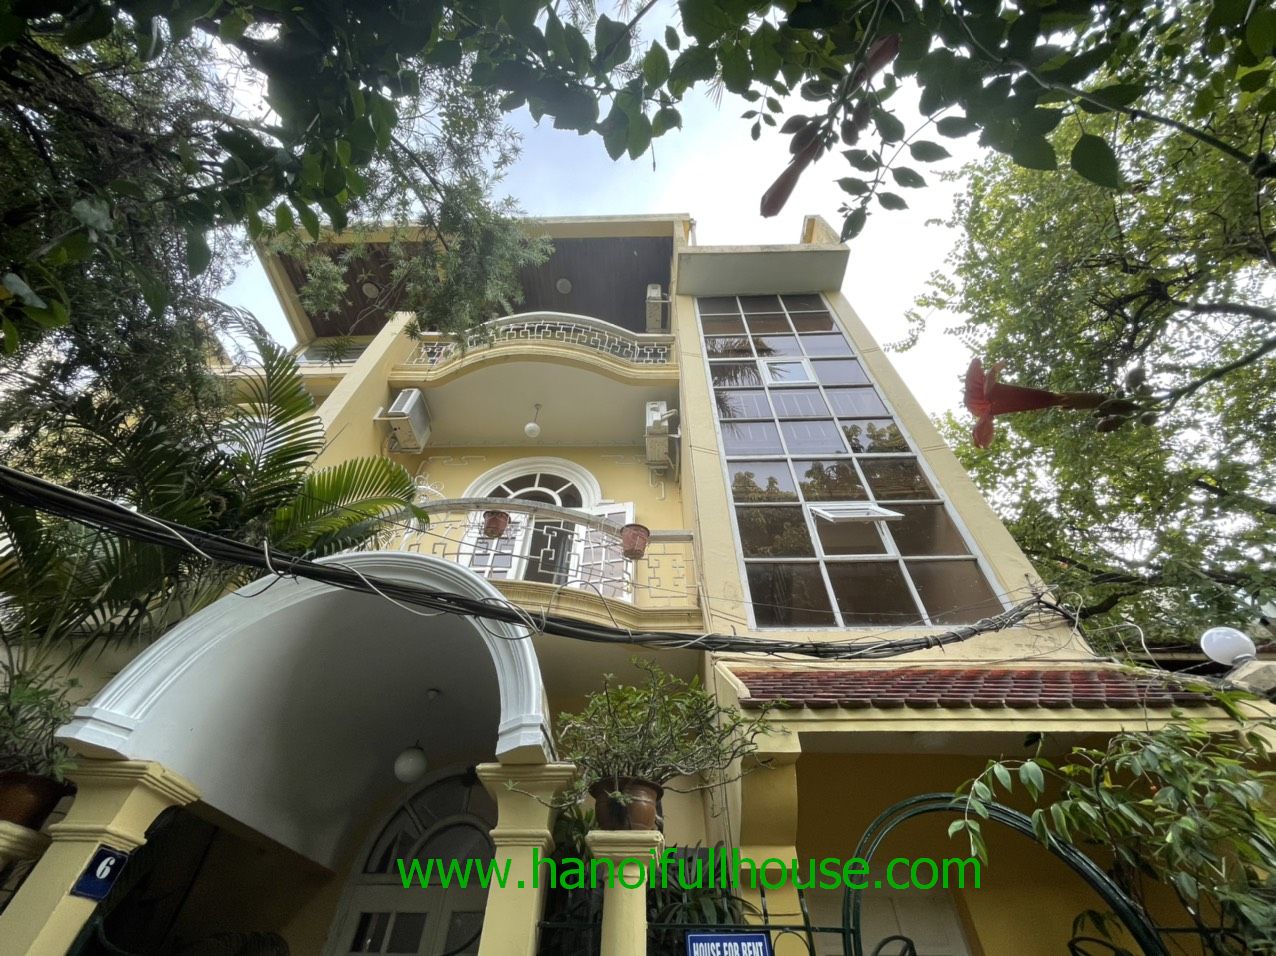 4 Bedroom house with yard garden in Tay Ho dist to rent